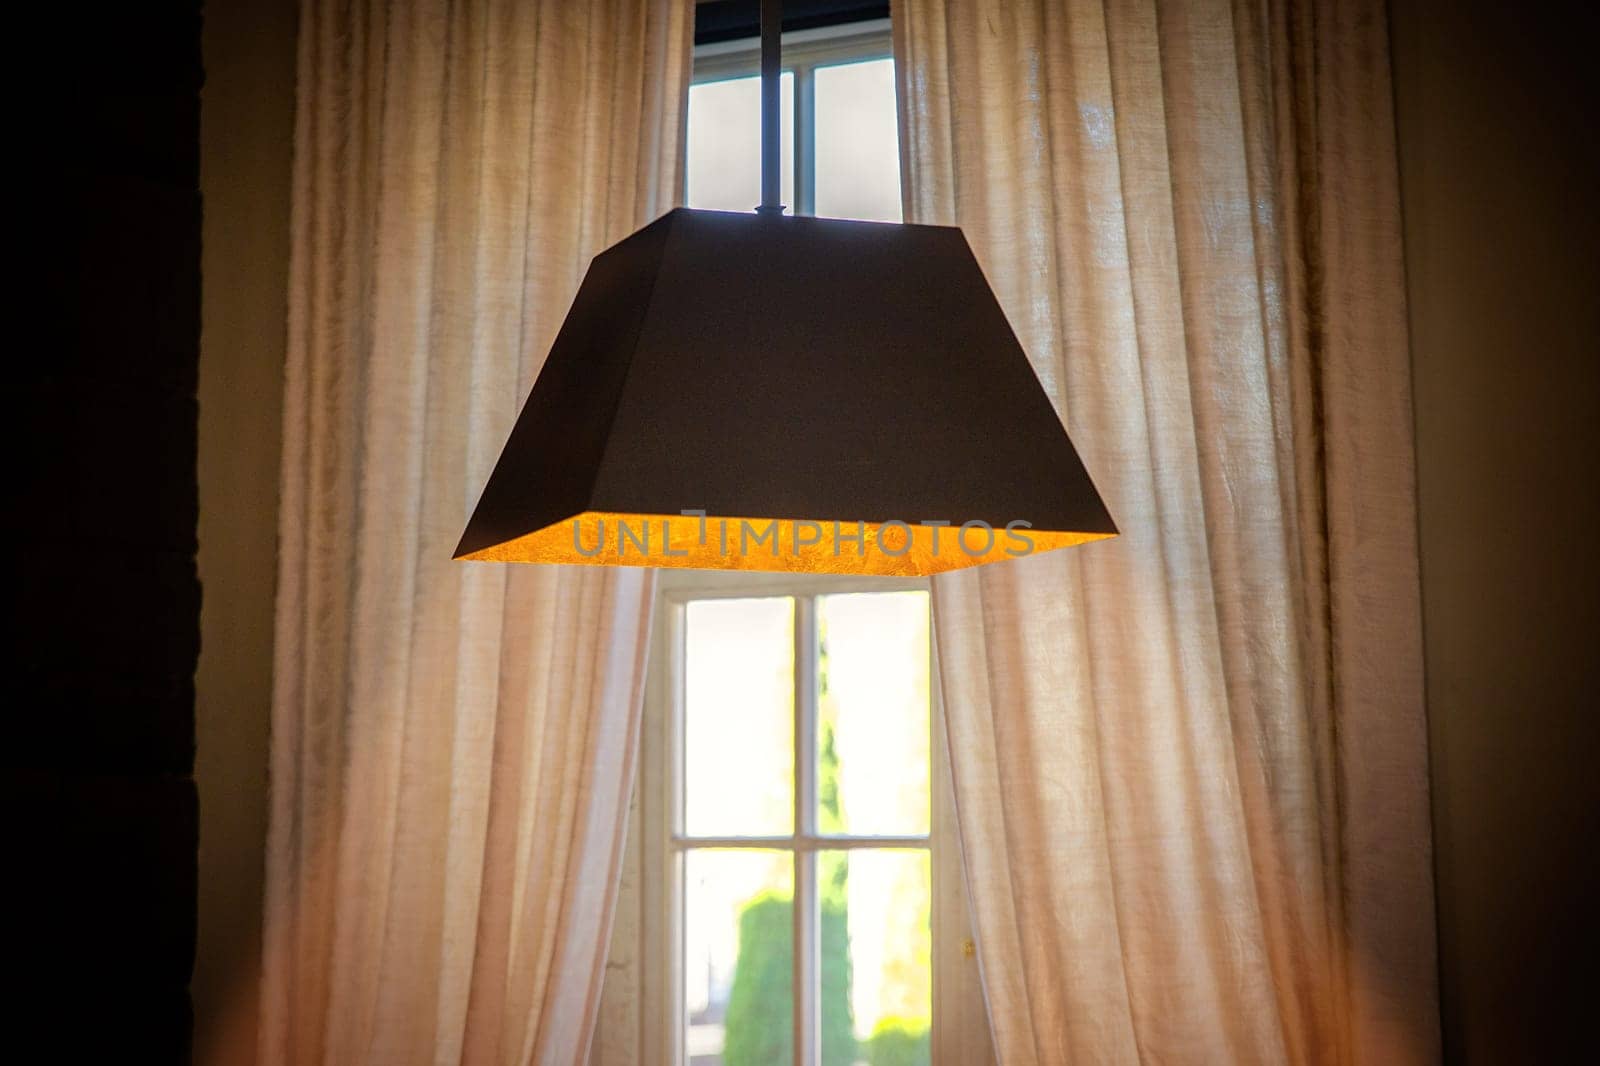 A lamp hanging from the ceiling shines with warm light in front of a window with curtains by Rom4ek